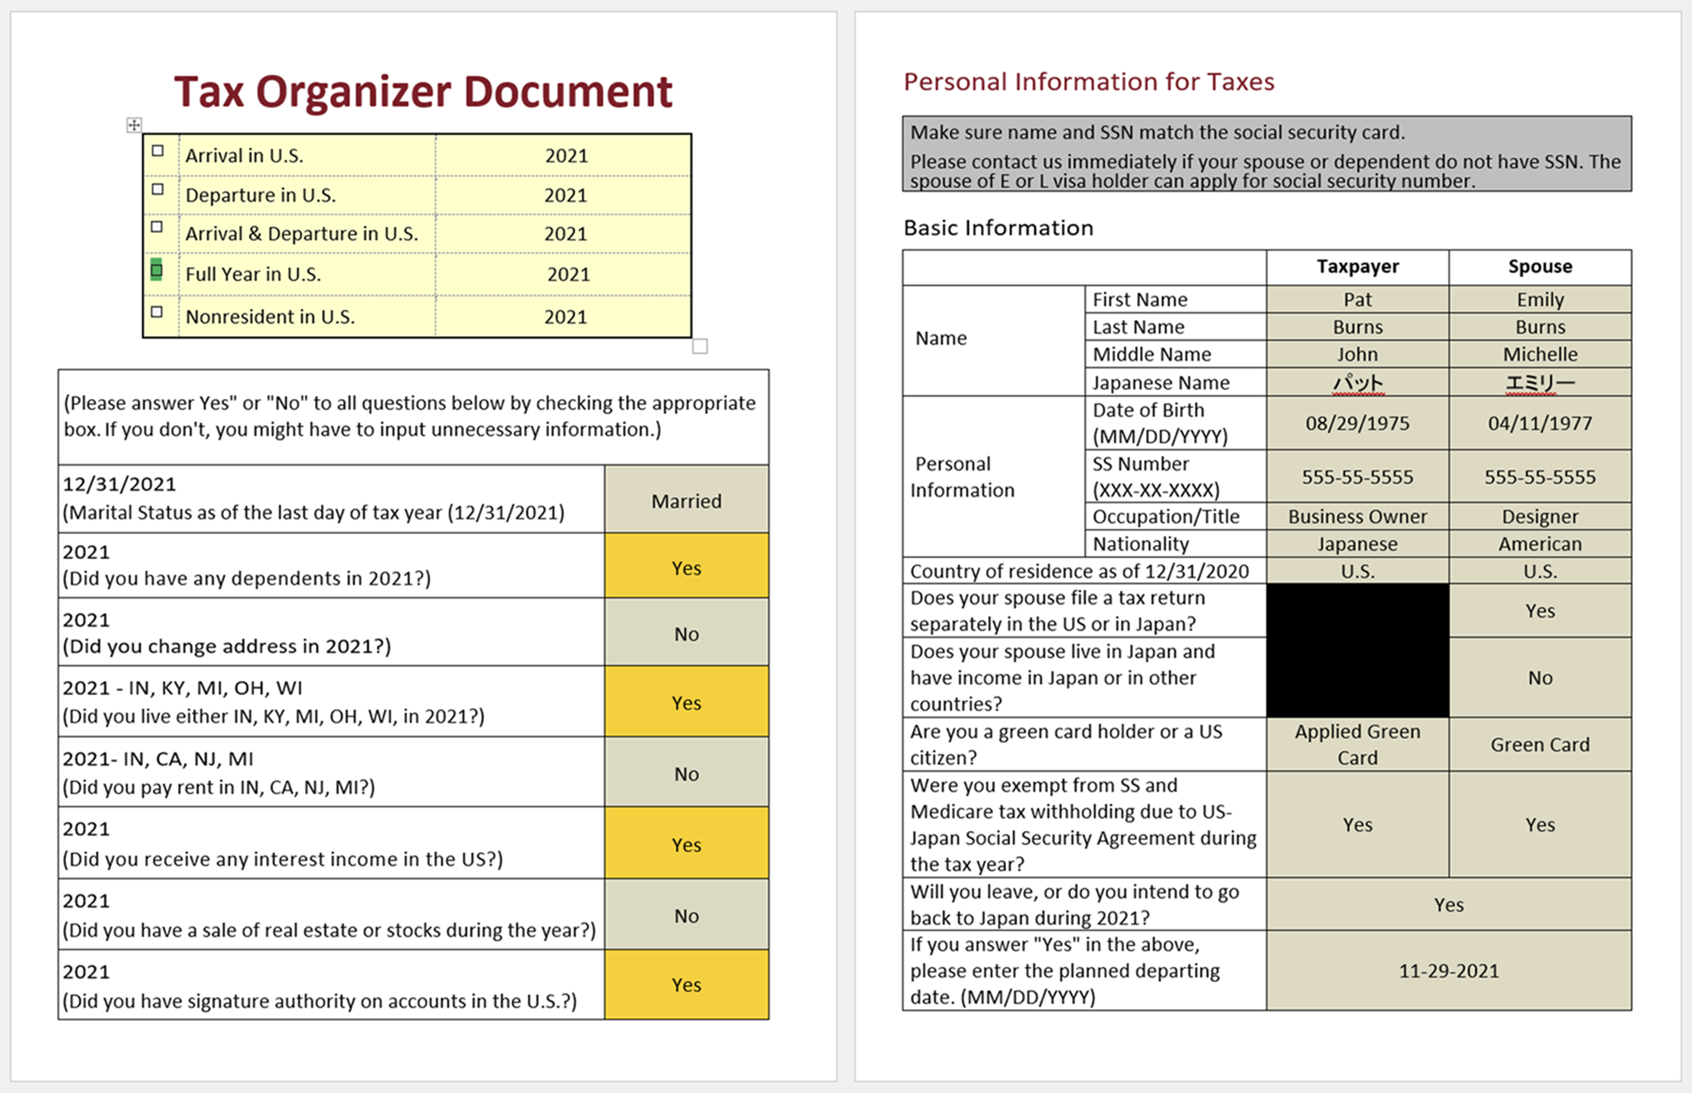 Tax organizer document created by the Forms2Docs rule-based document creation platform.